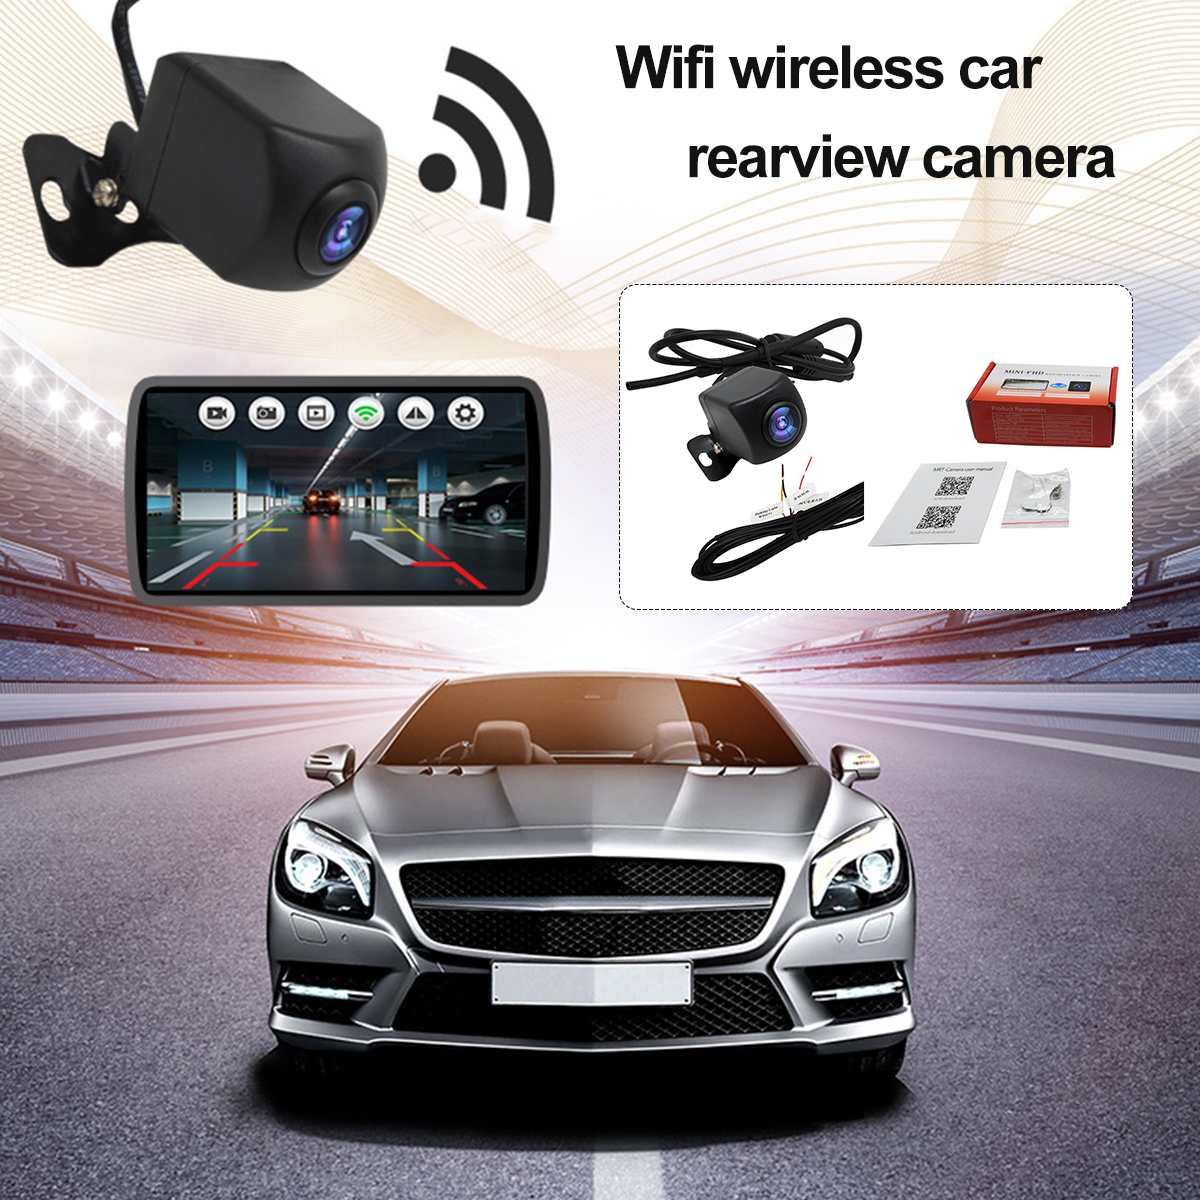 2.4G waterproof dust-proof Wifi Wireless IP67 Waterproof Car Rearview Camera No-light night vision For iOS / Android